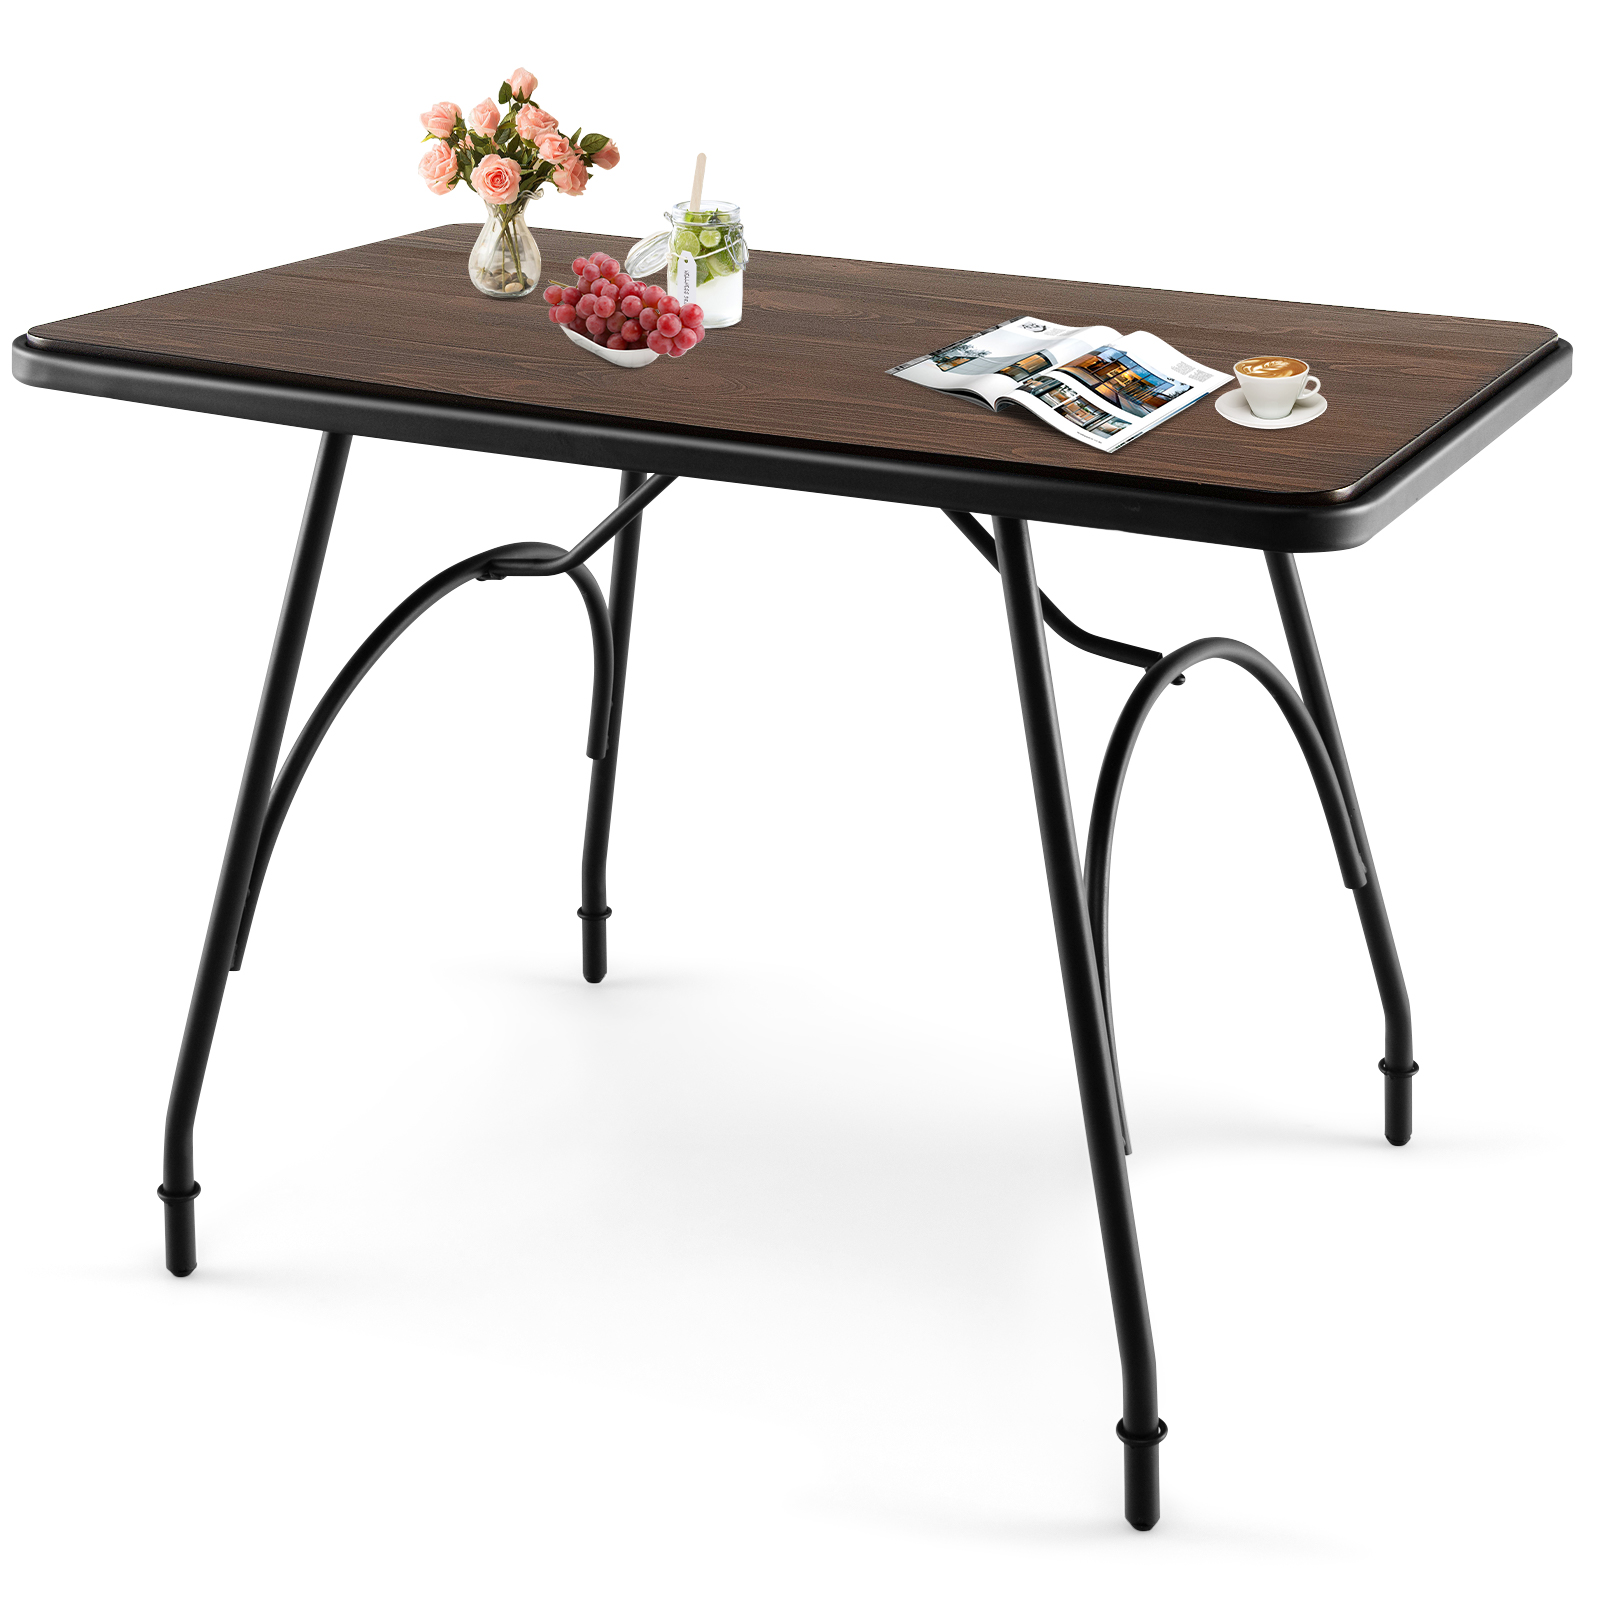 Industrial Style Dining Table with Spacious Tabletop